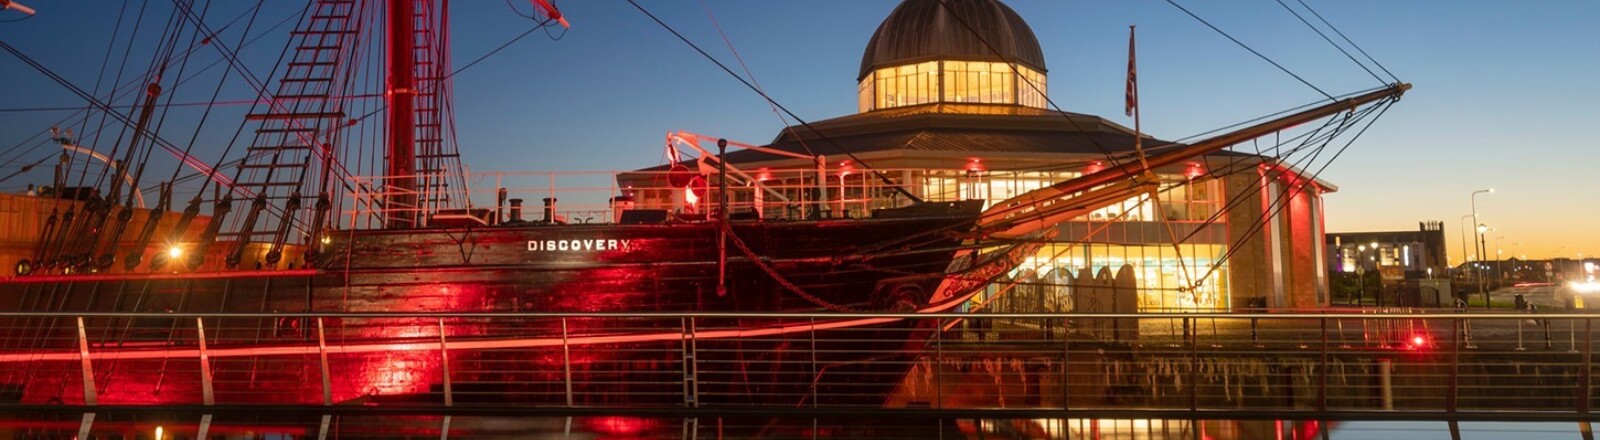 The RRS Discovery sits at Discovery Point, lit up in red as the sun sets